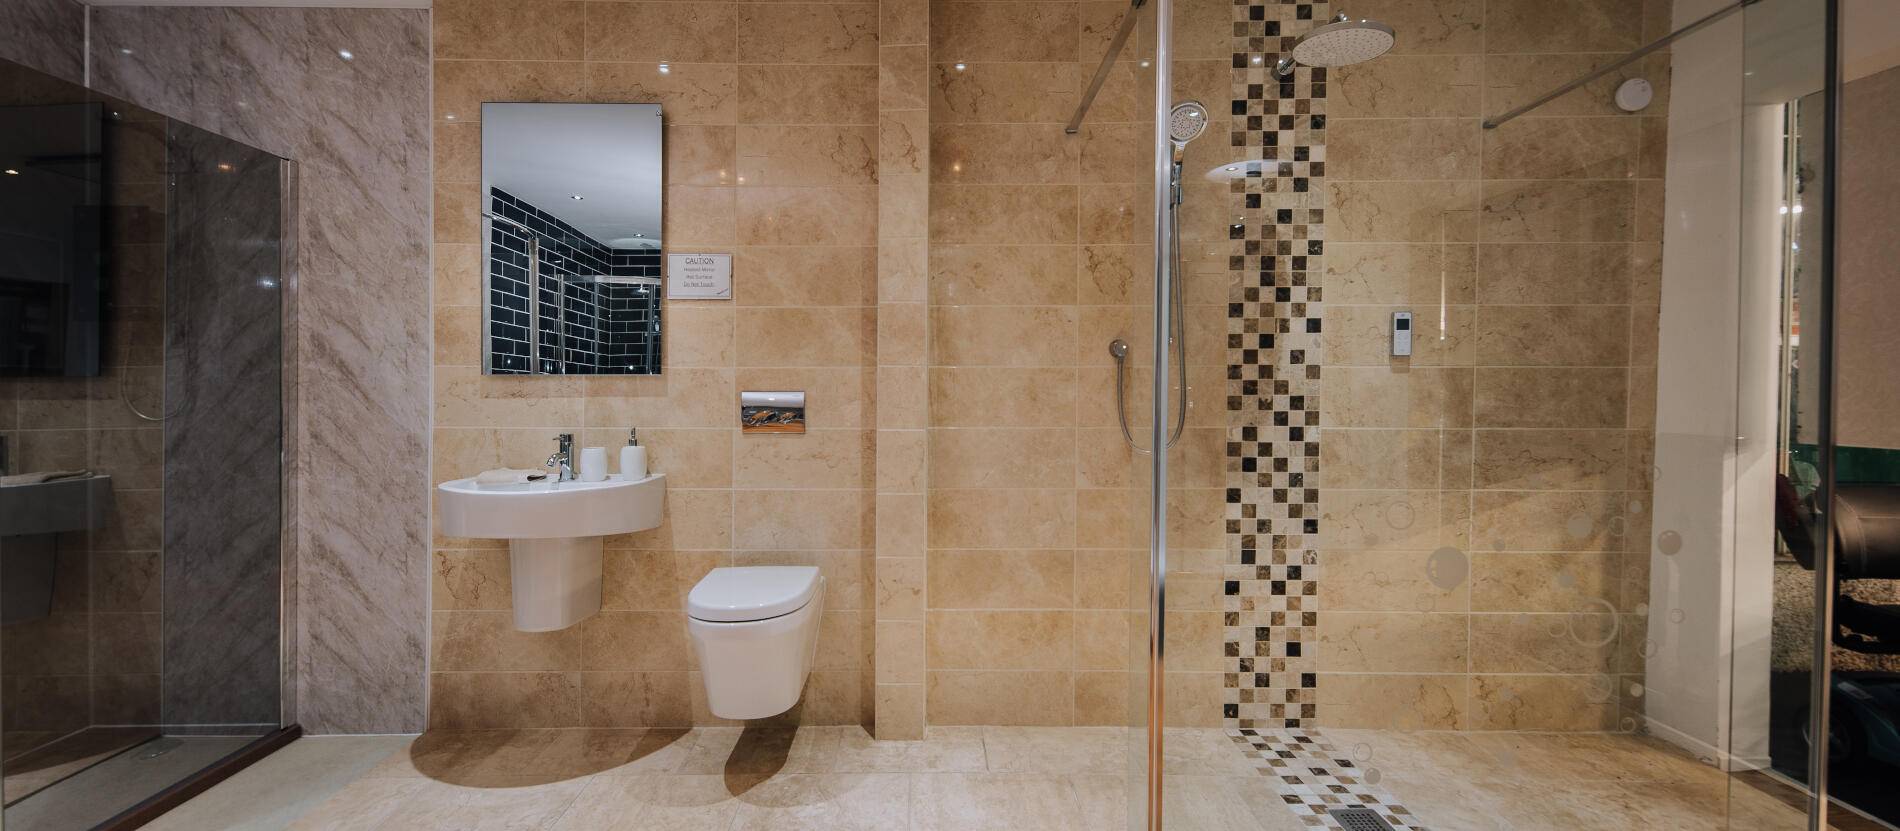 Walk in shower with big clear glass door and toilet and sink